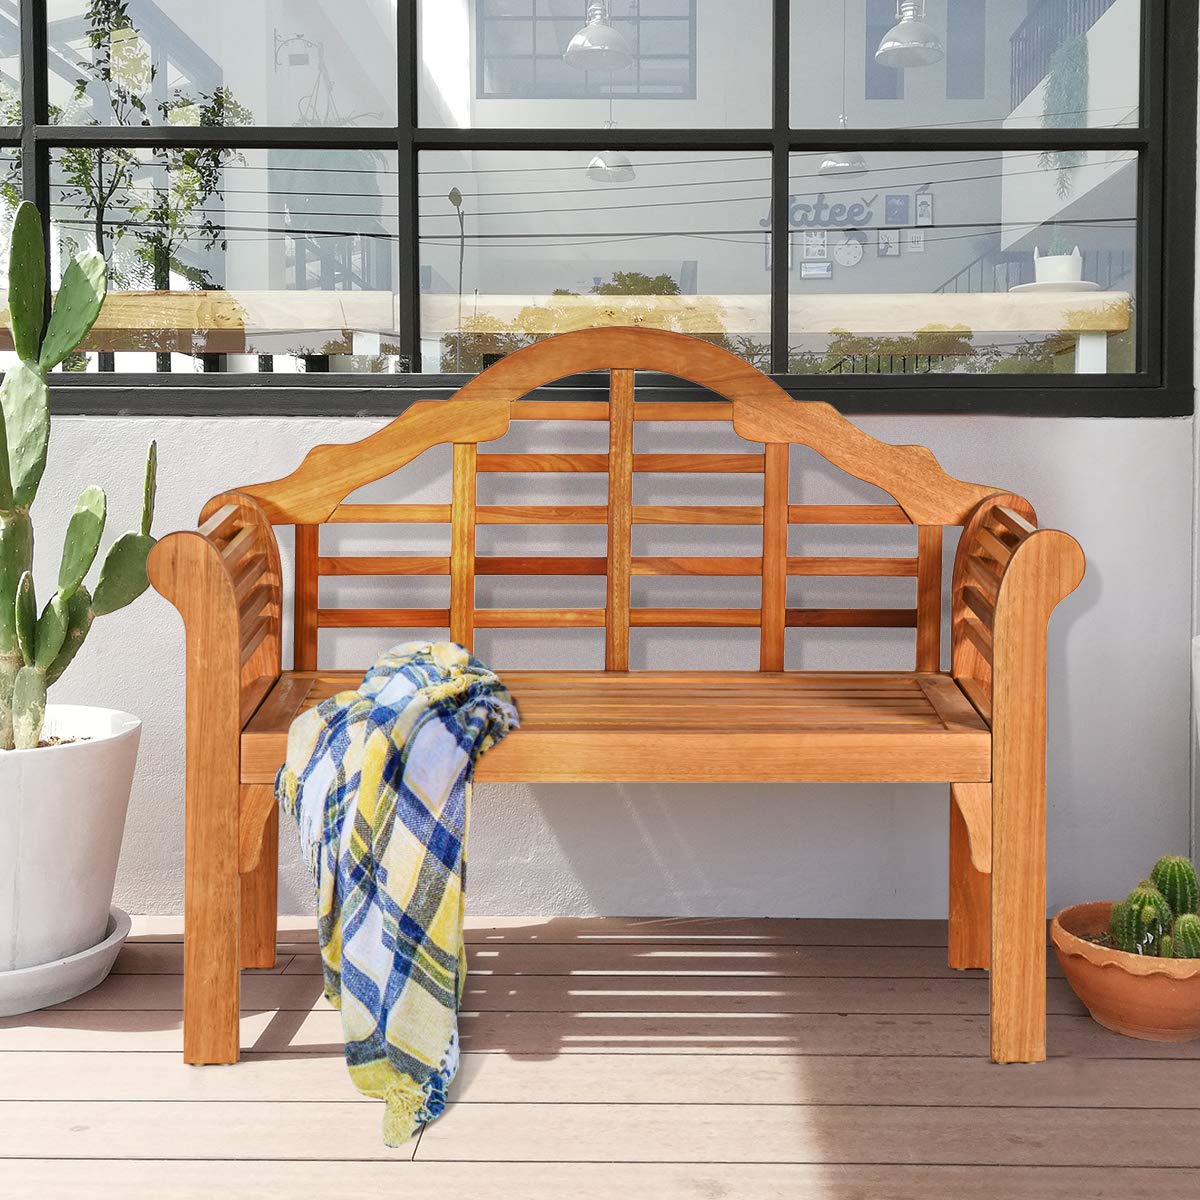 Tangkula Outdoor Eucalyptus Wood Folding Bench, 4 Ft Foldable Solid Wood Garden Bench, Two Person Loveseat Chair for Garden, Patio, Porch, Poolside,